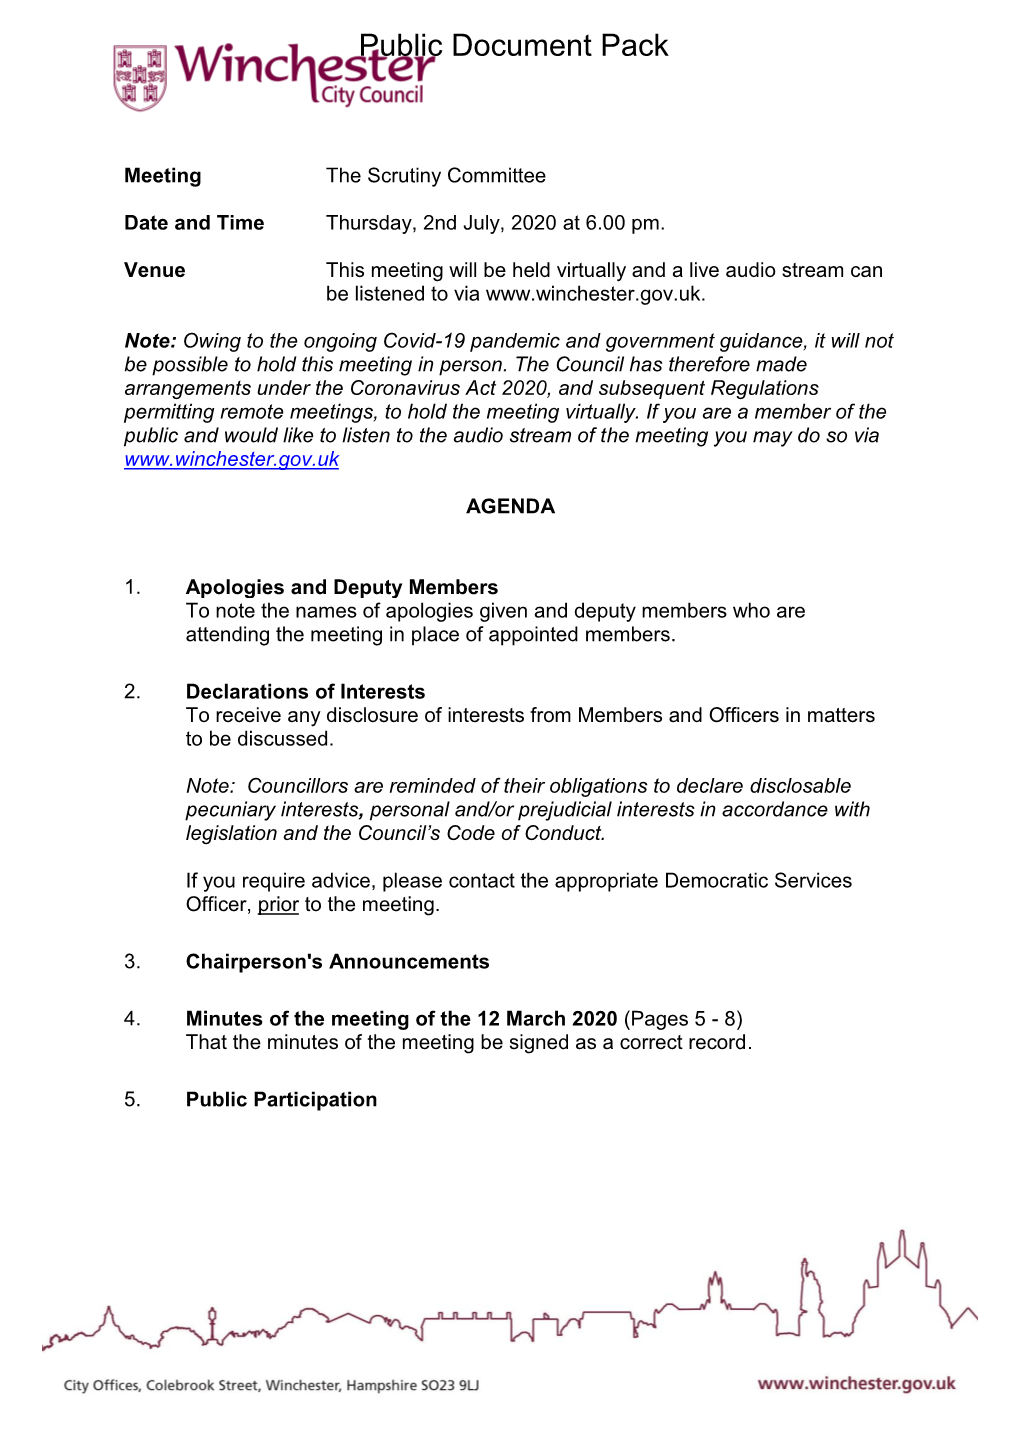 (Public Pack)Agenda Document for the Scrutiny Committee, 02/07